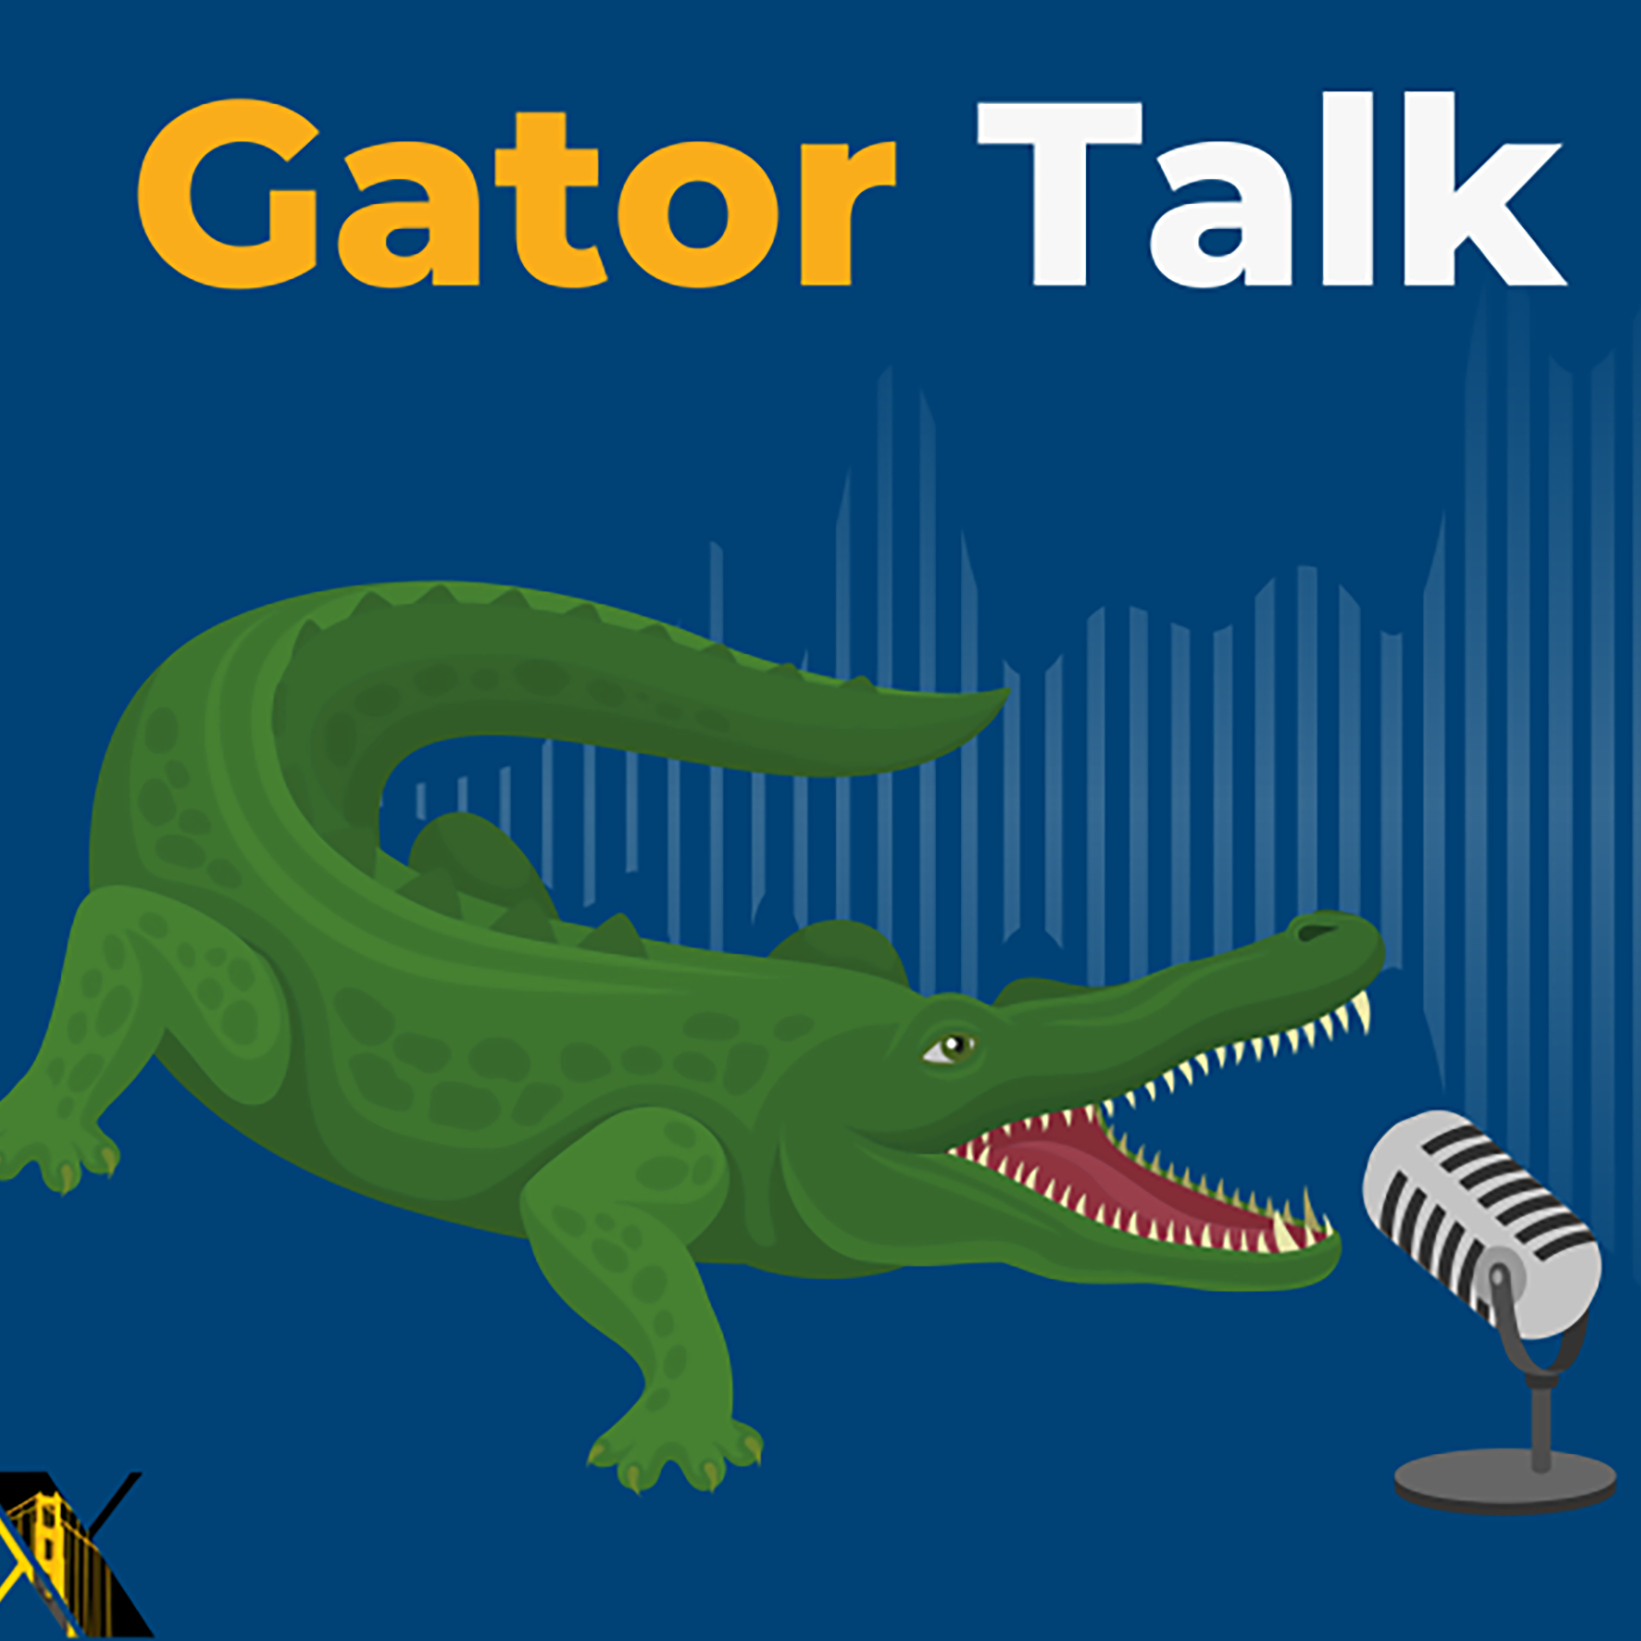 Gator Talk: An outfit that builds community